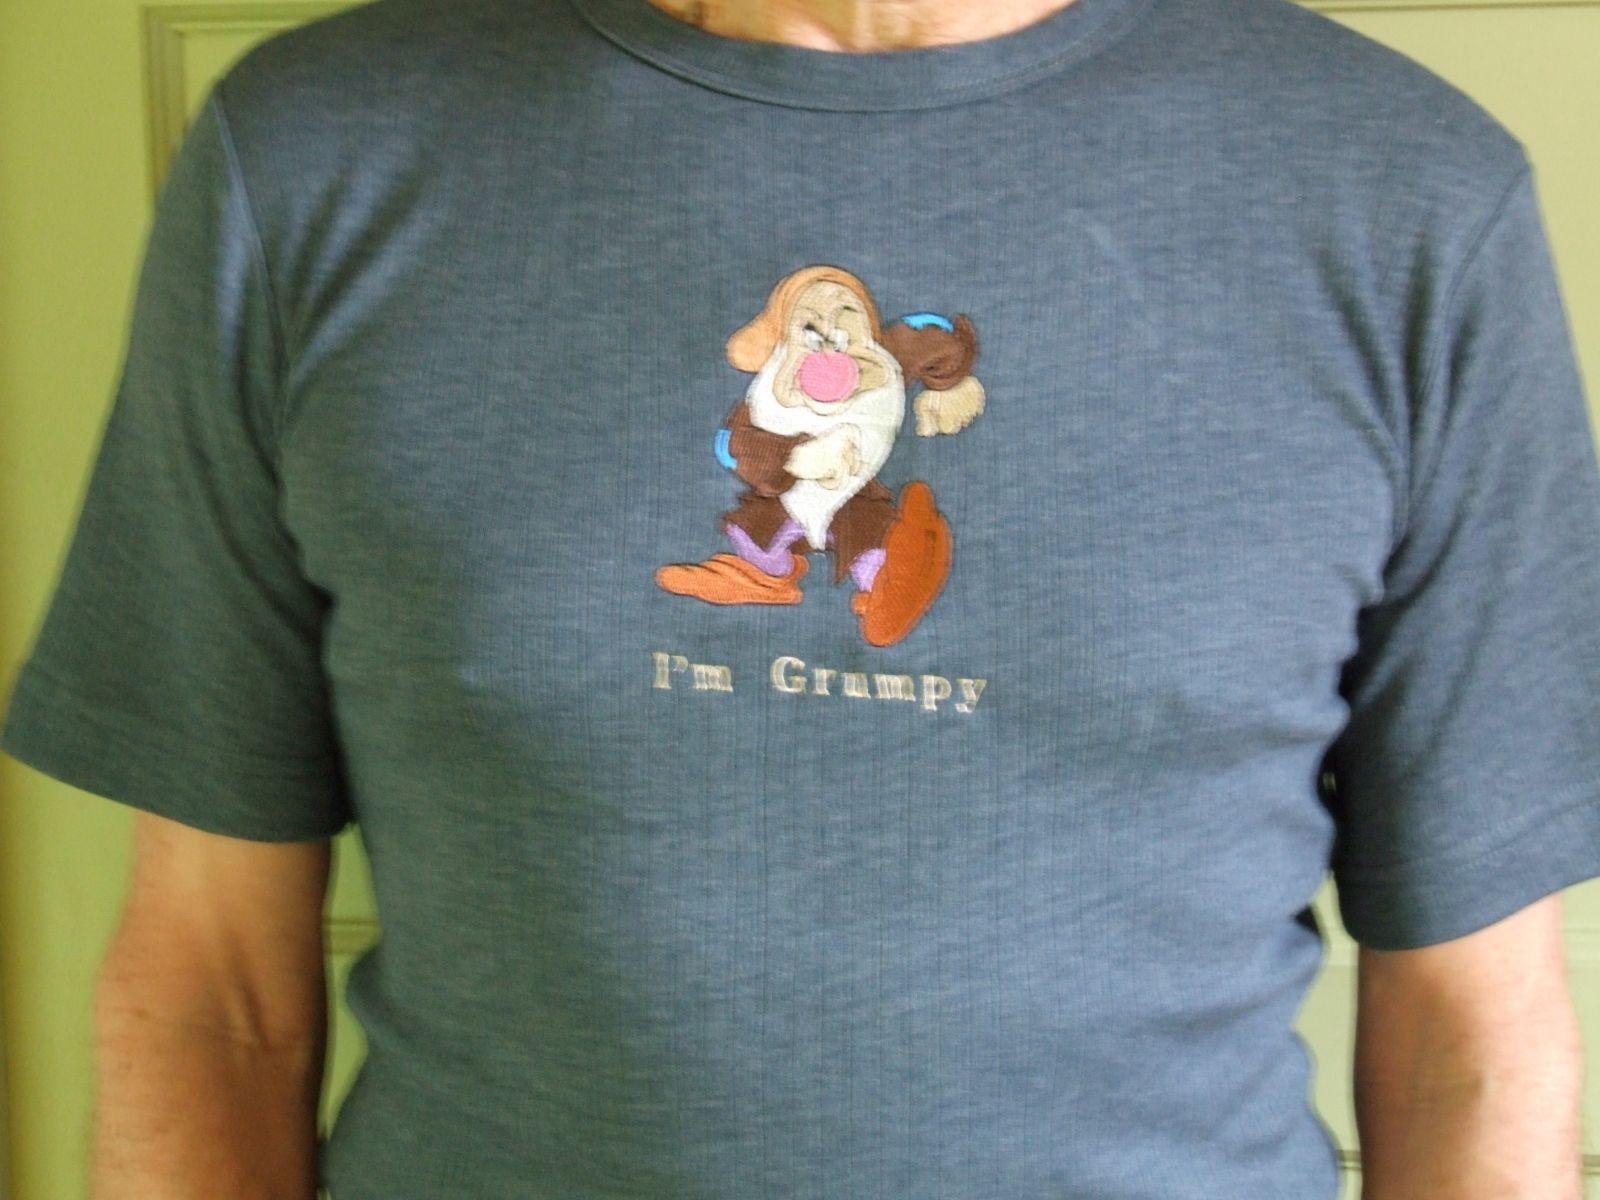 T shirt embroidered with Grumpy design